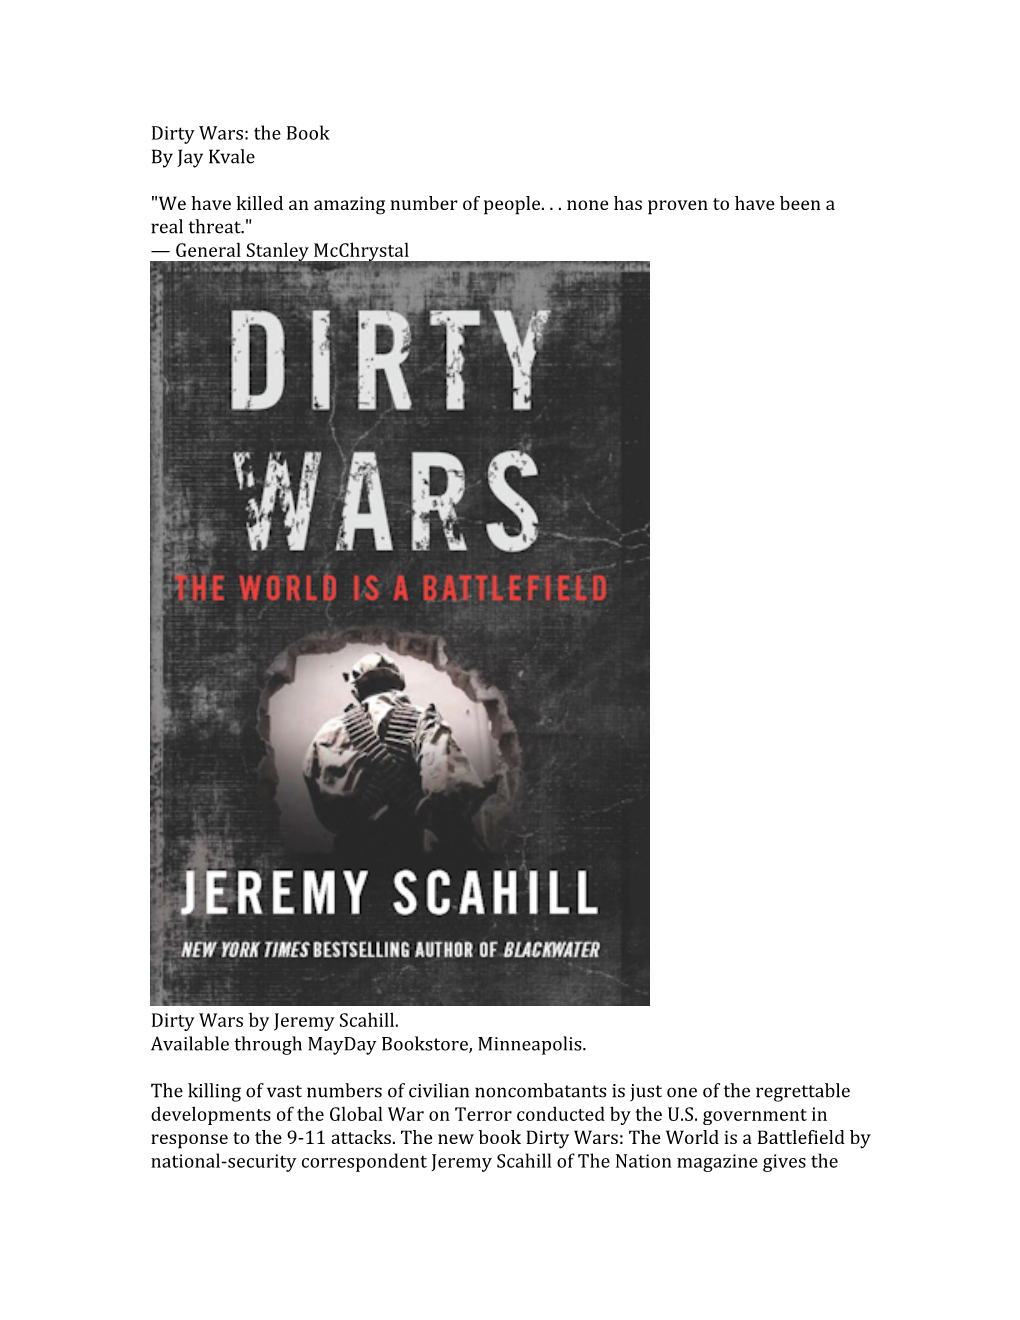 Dirty Wars: the Book by Jay Kvale